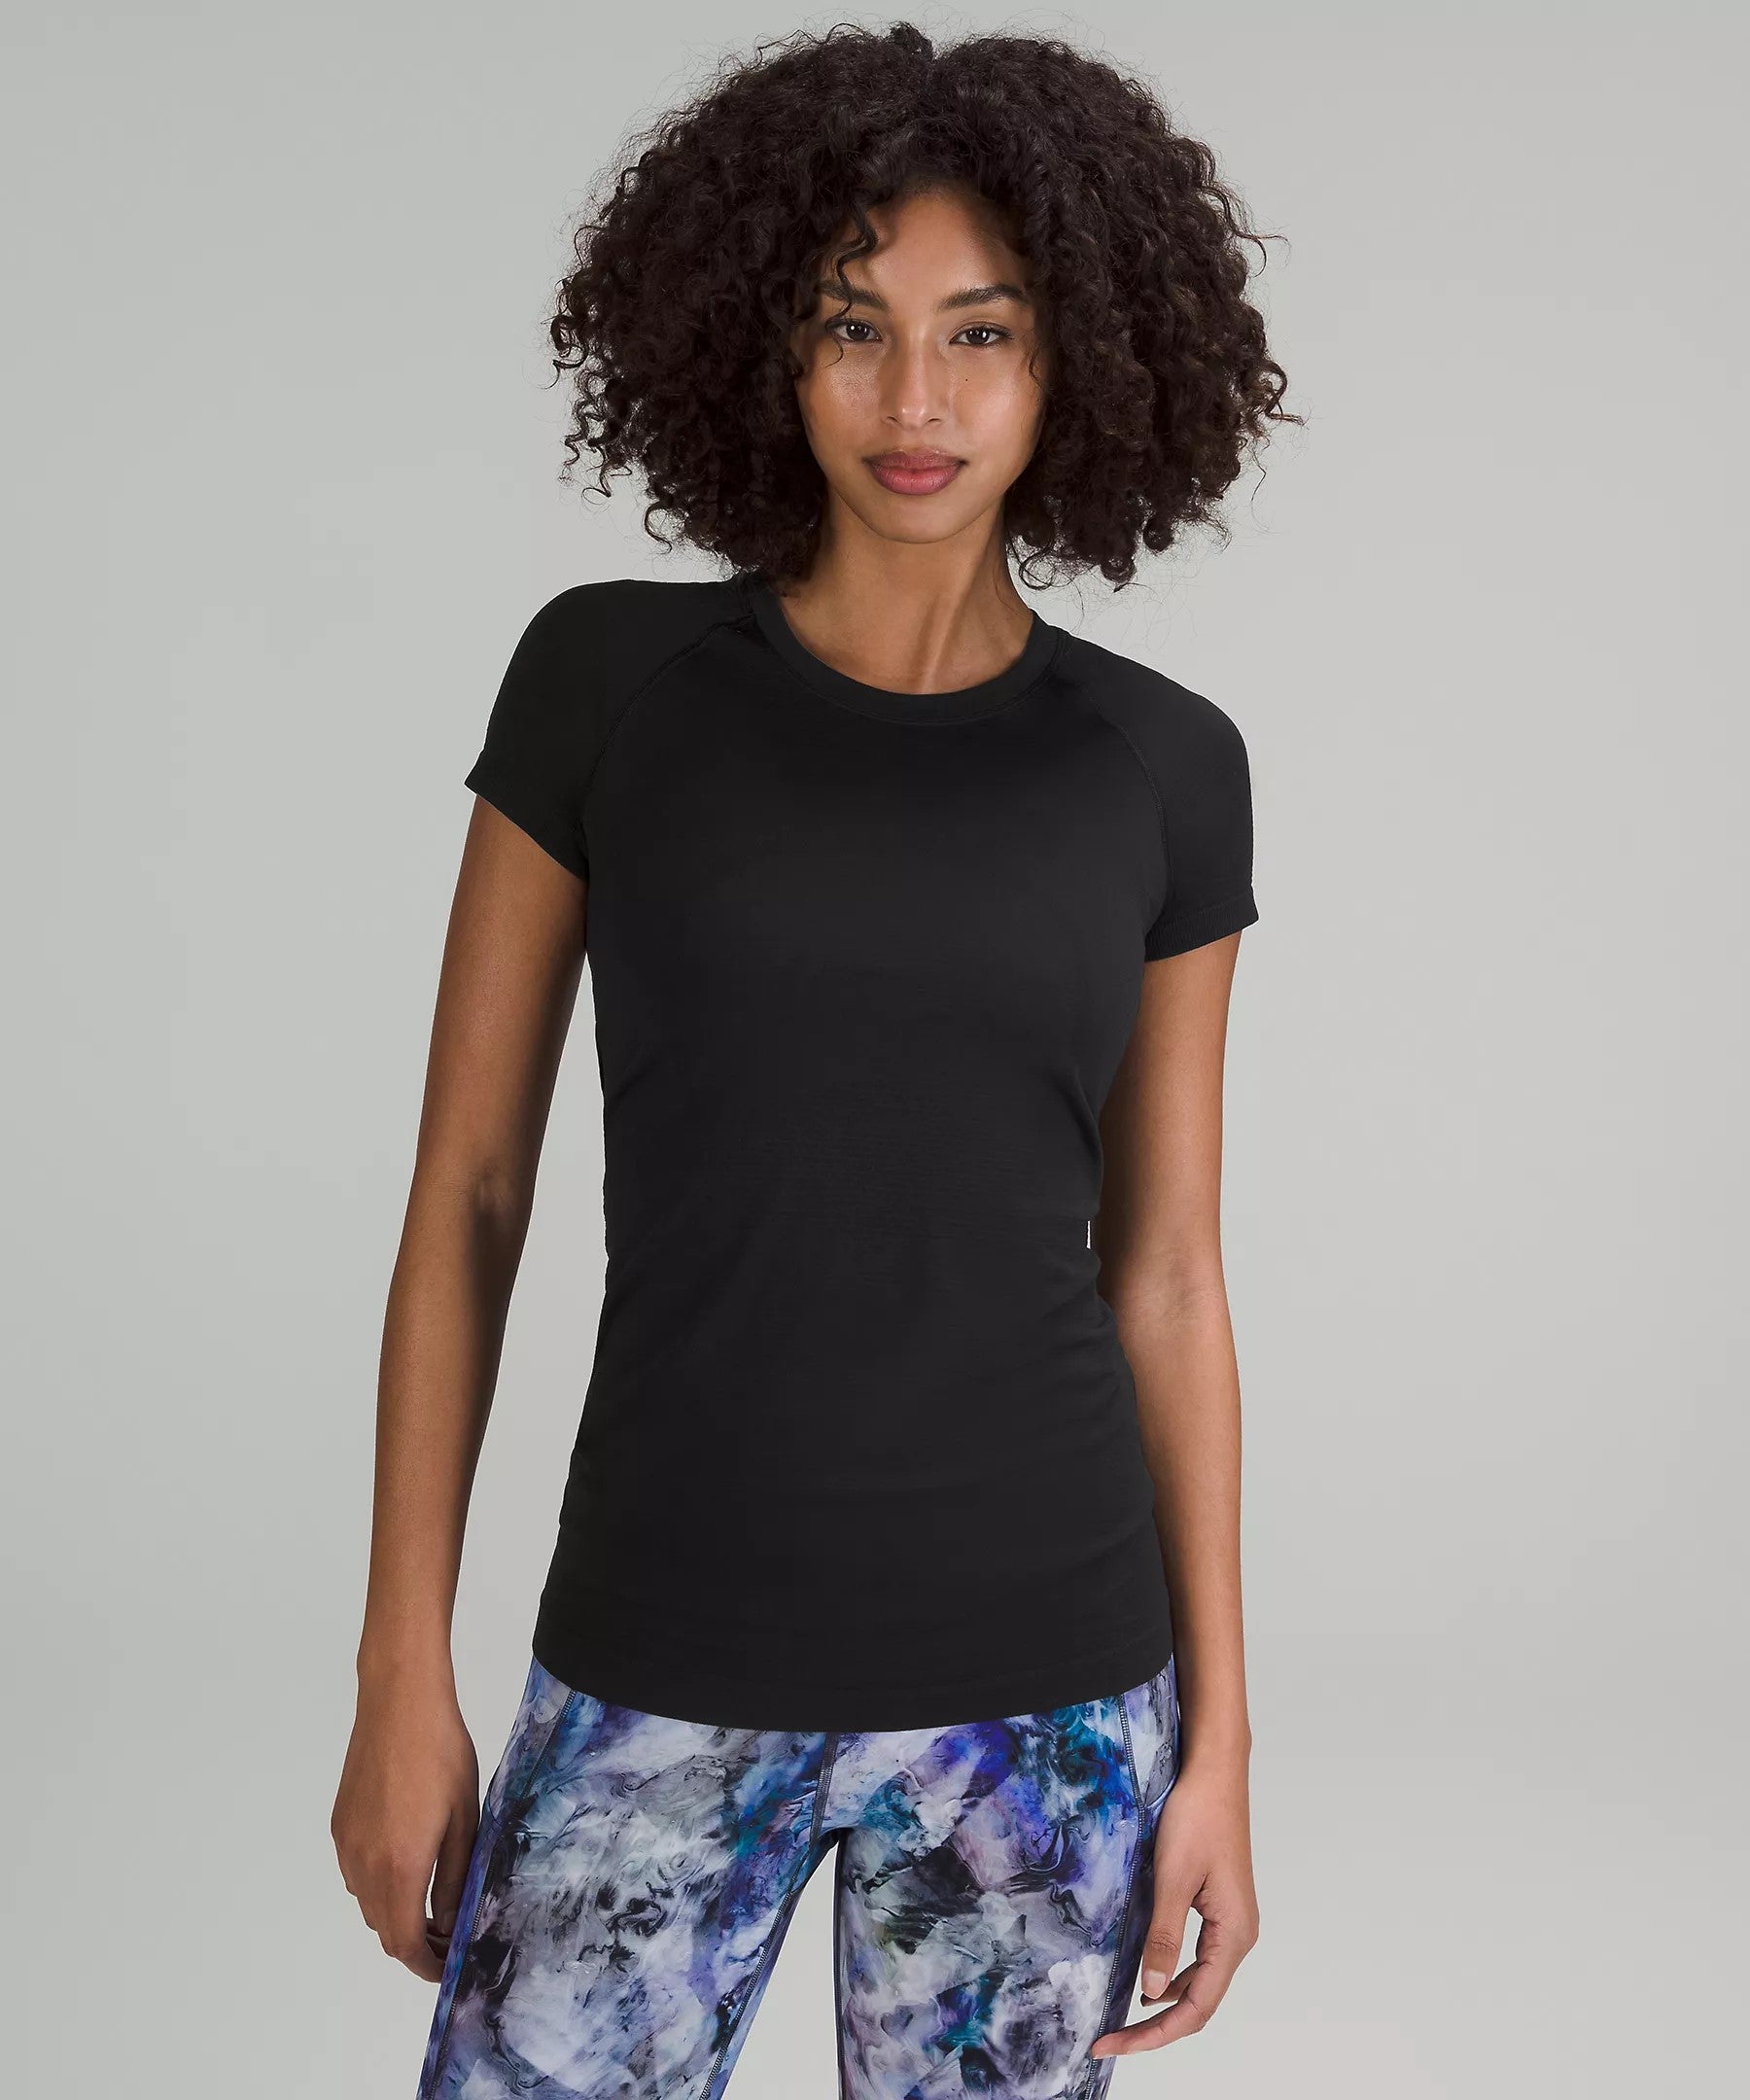 WOMEN'S SWIFTLY TECH SS 2.0  Performance Running Outfitters